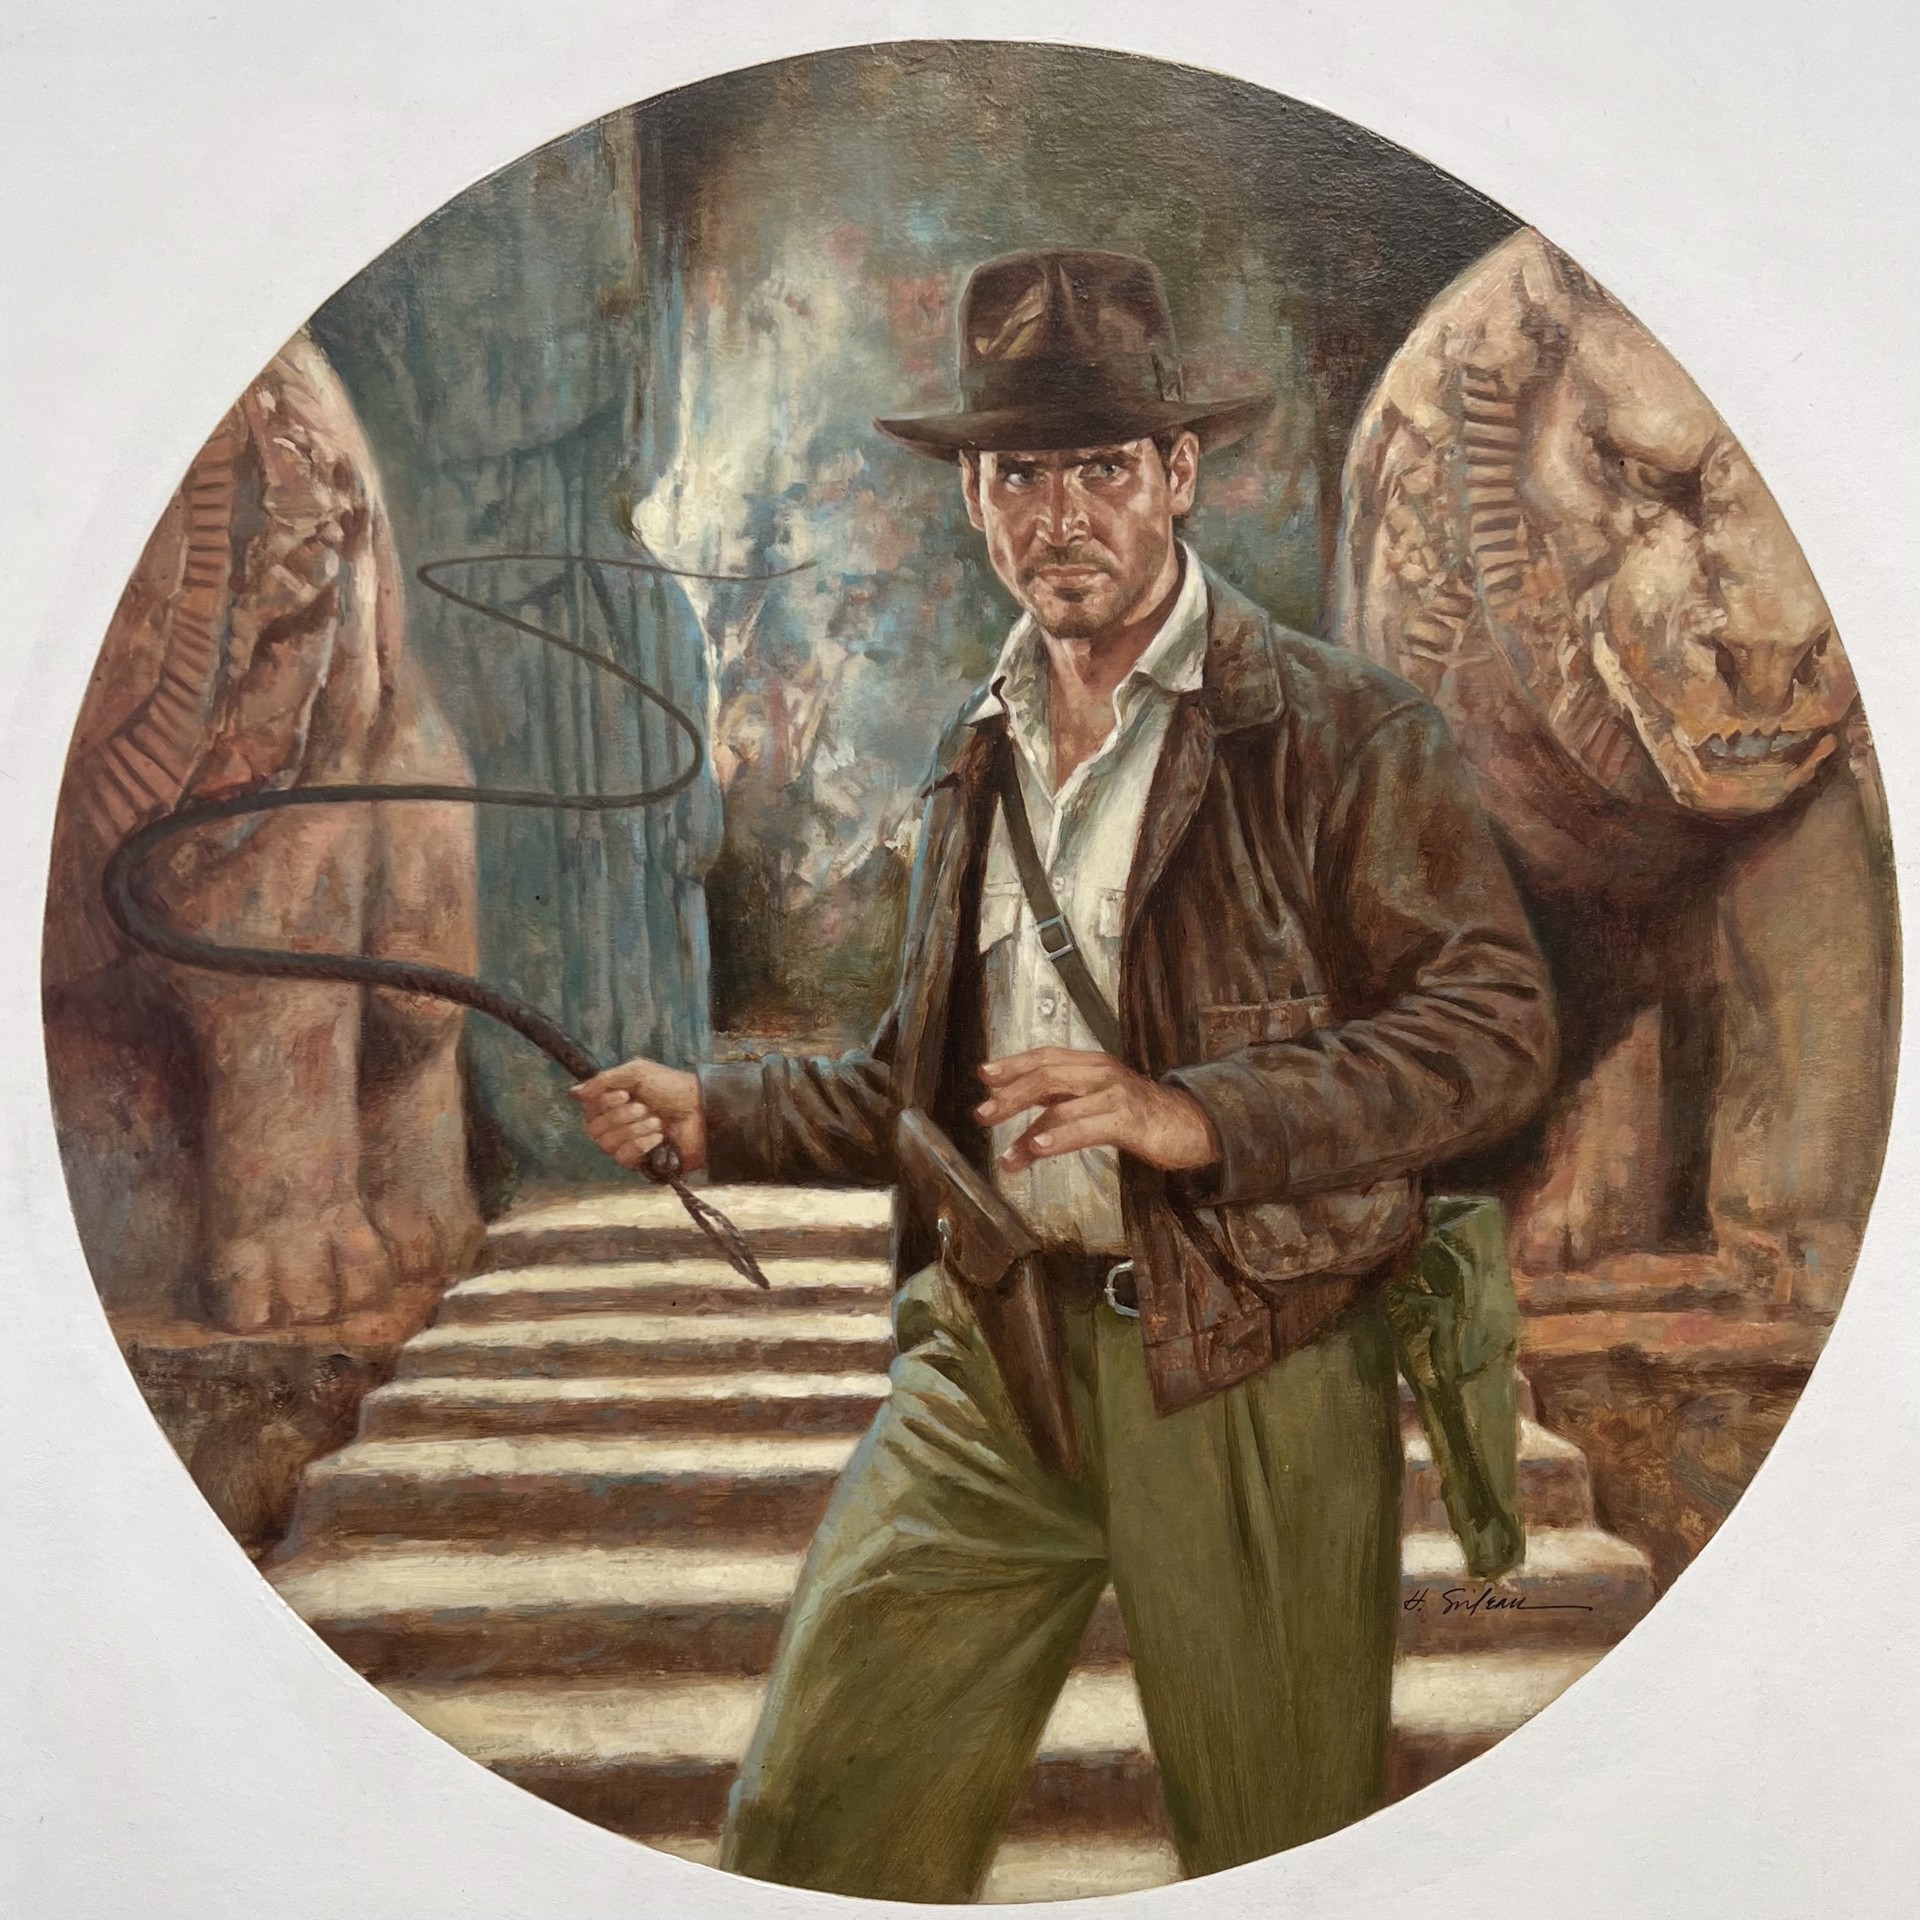 Indiana Jones Raiders of the Lost Ark by Hodges Soileau